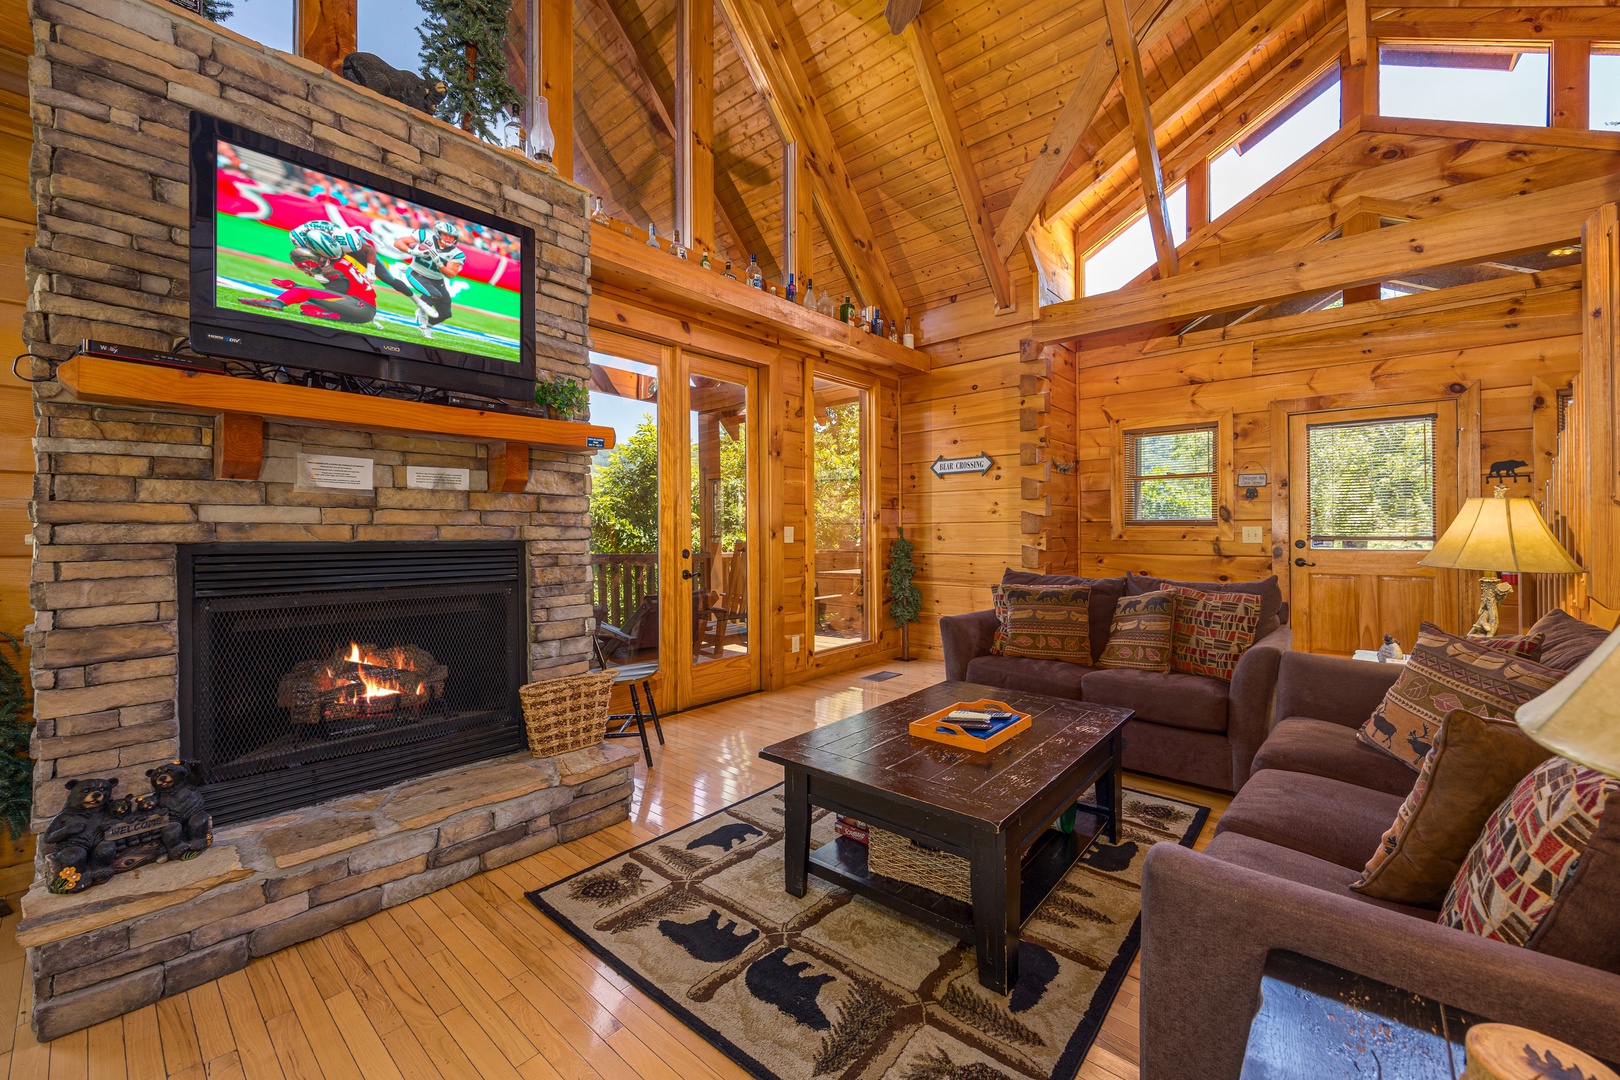 Flat screen at Moonbeams & Cabin Dreams, a 3 bedroom cabin rental located in Pigeon Forge